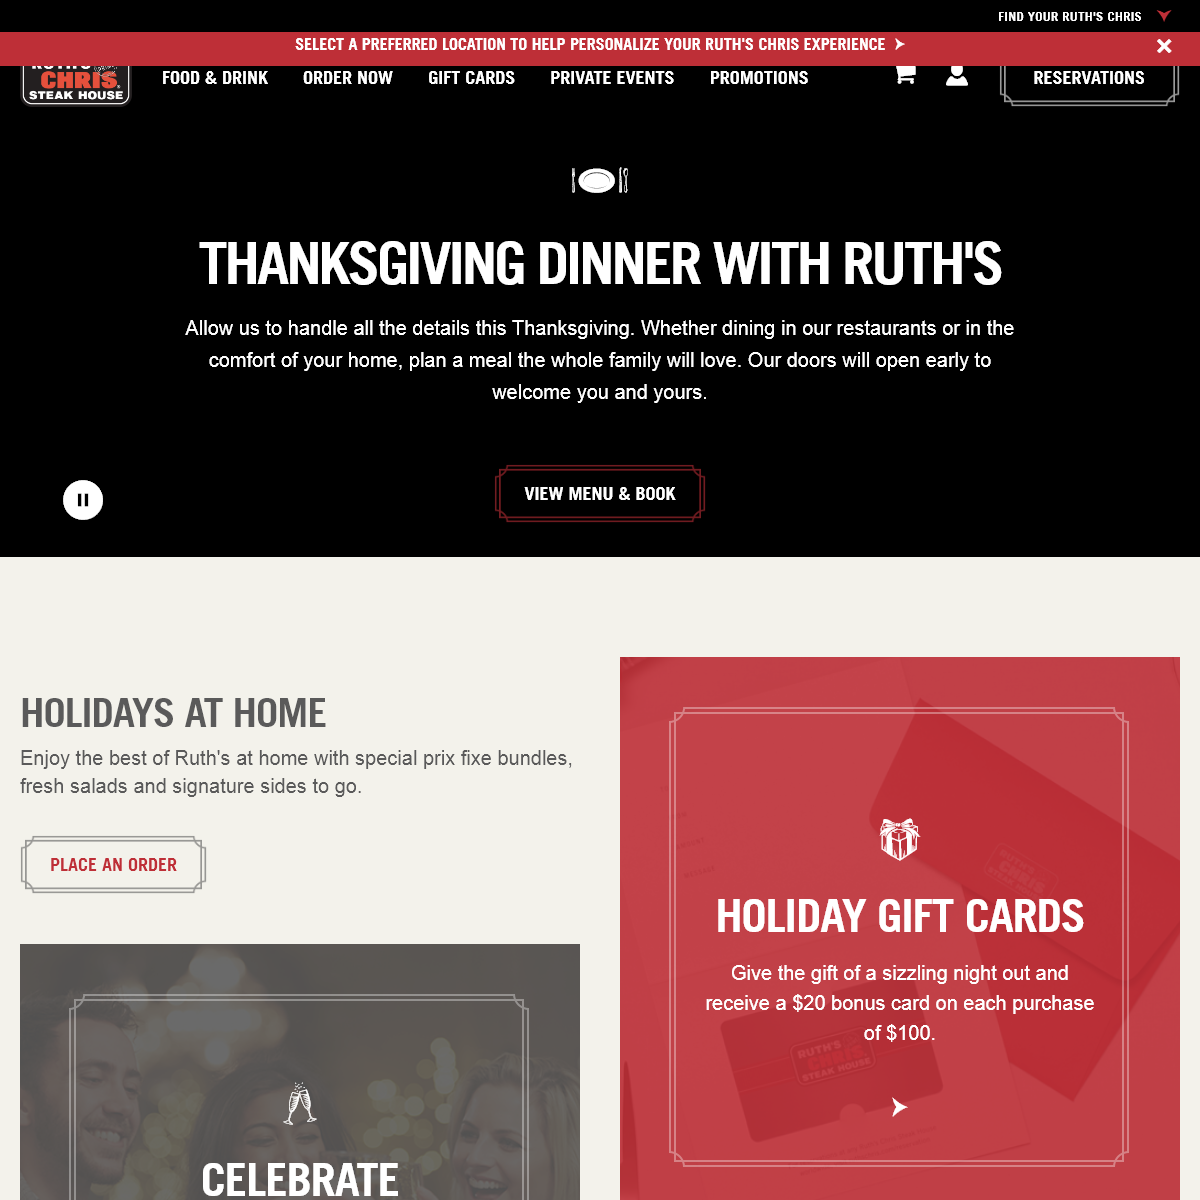 A complete backup of ruthschris.com